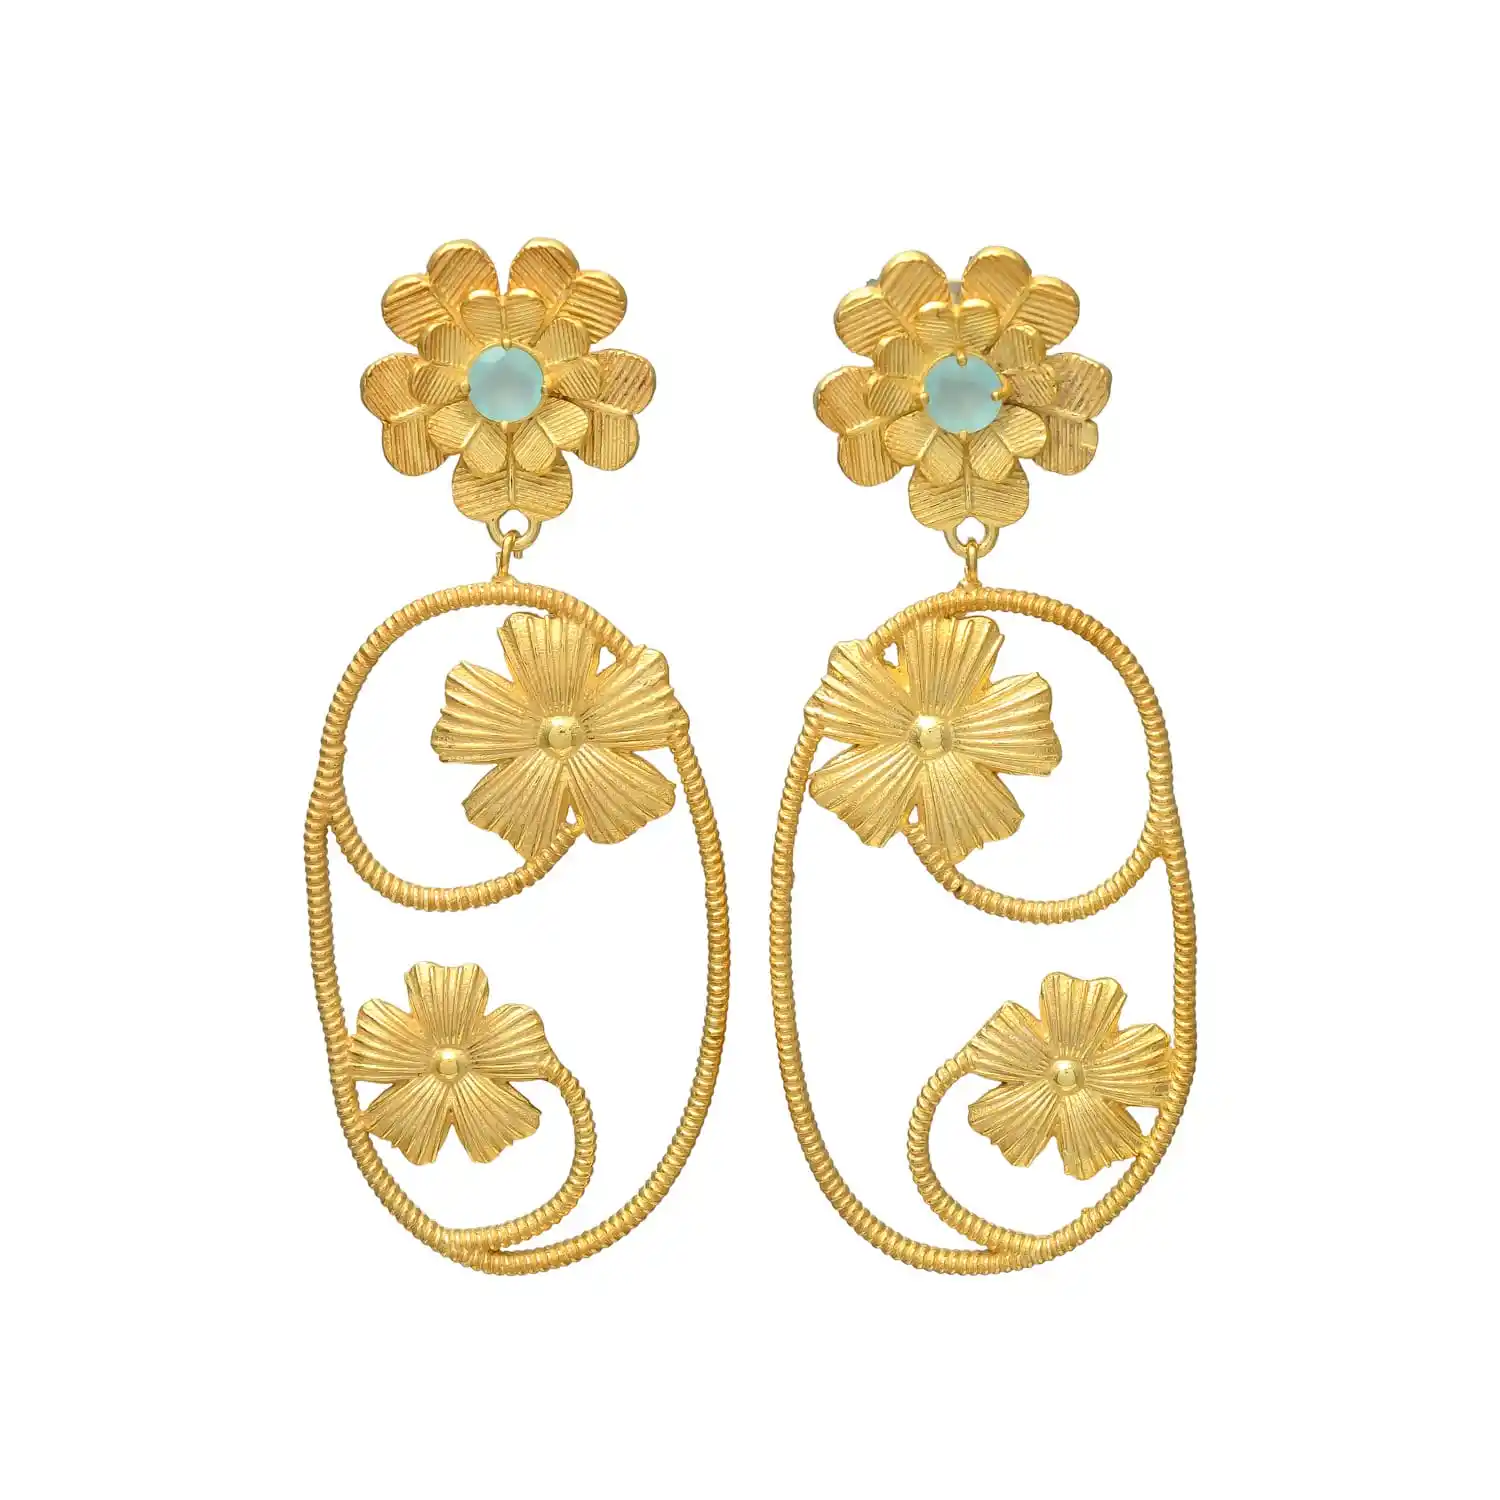 Turquoise Floral Gold Earrings. Crafted with intricate flower designs and adorned with beautiful turquoise stones